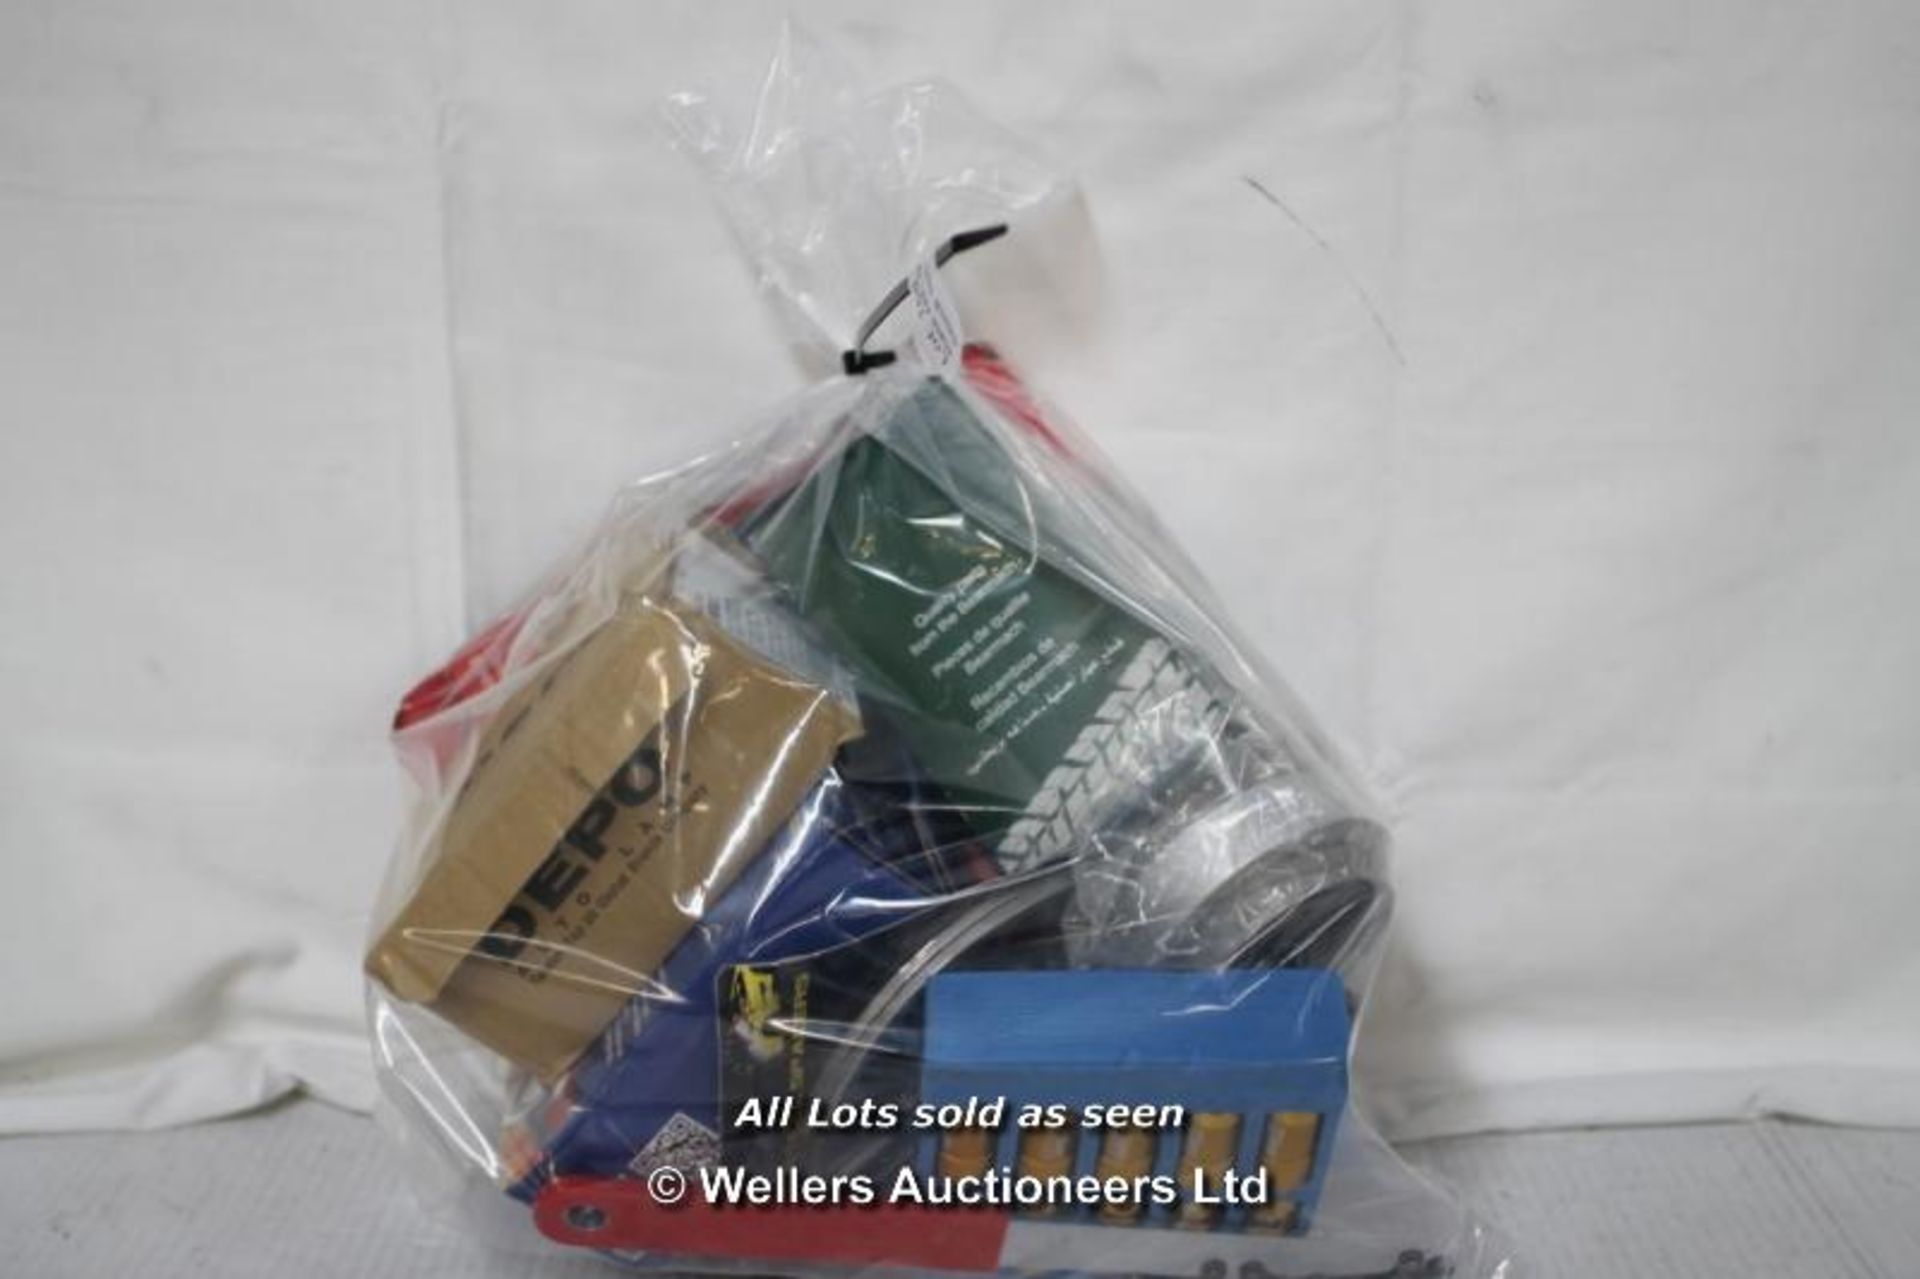 11 MIXED ITEMS, WHEEL SPACER, LUG NUTS, COGS, EXHAUST HEAT WRAP, OIL FILTERS X2, BELT, BJS COMPONENT - Image 2 of 2